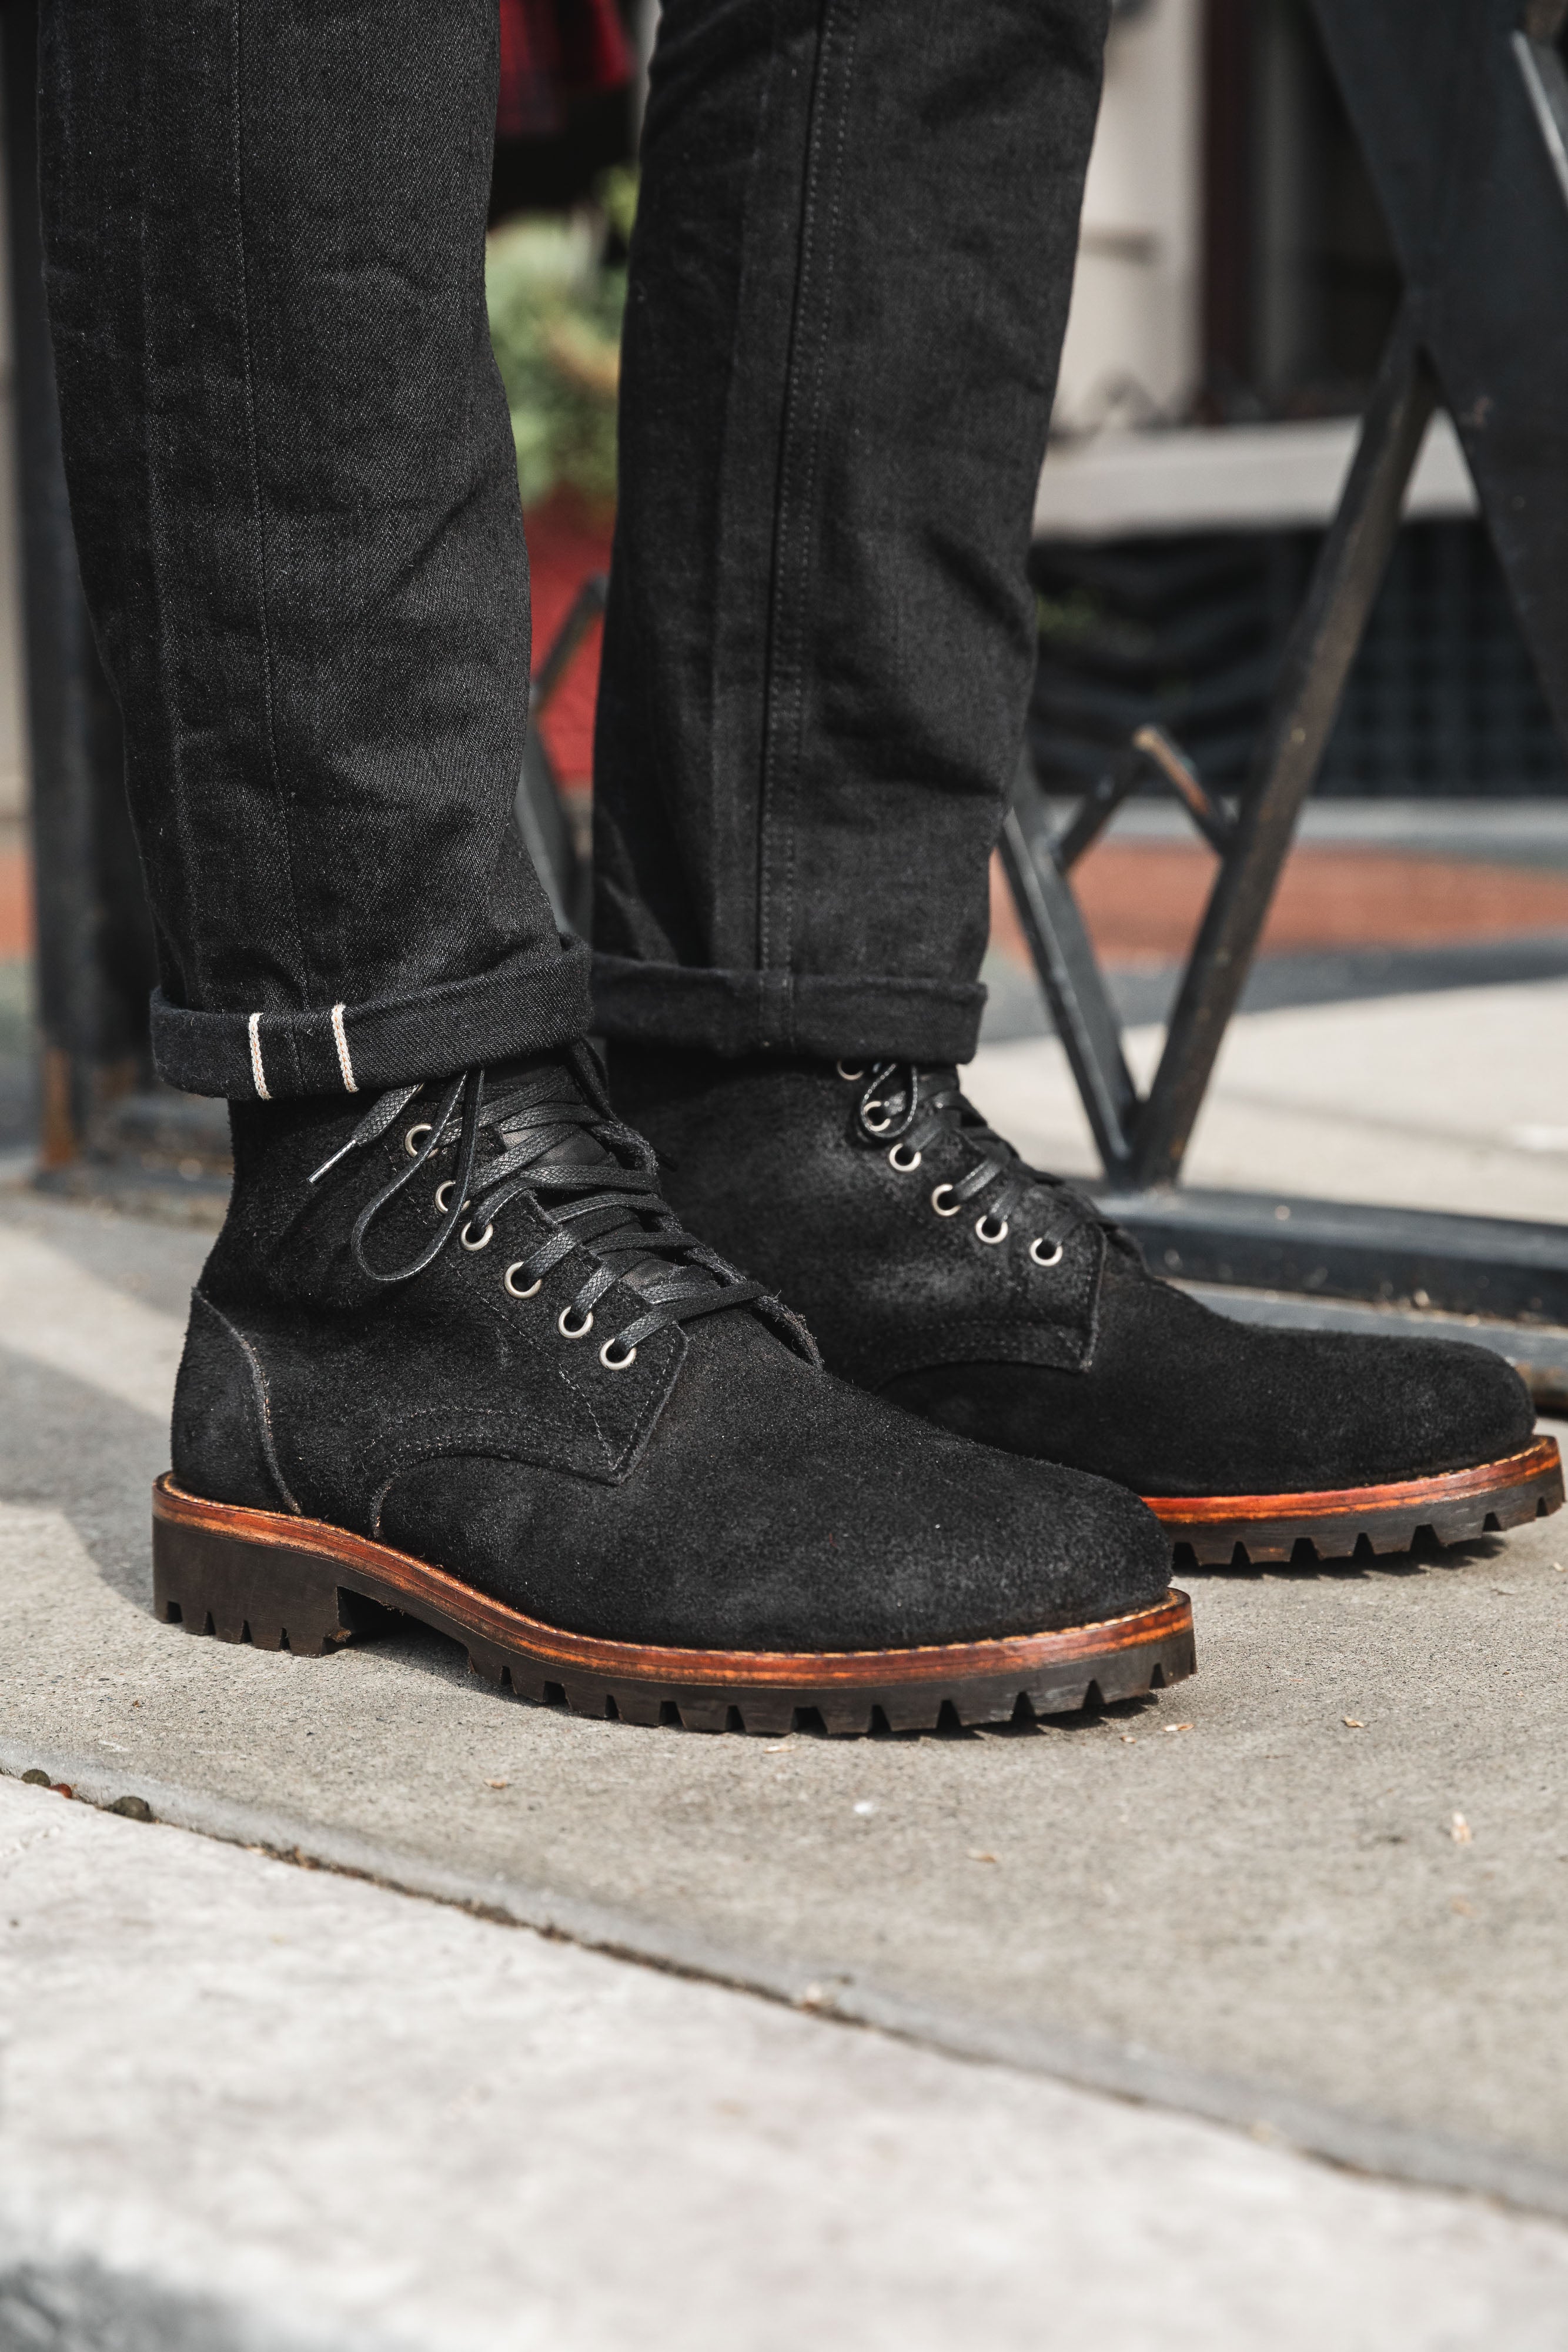 Oak Street Bootmakers x ButterScotch - Black Oil Tan Roughout Trench Boots